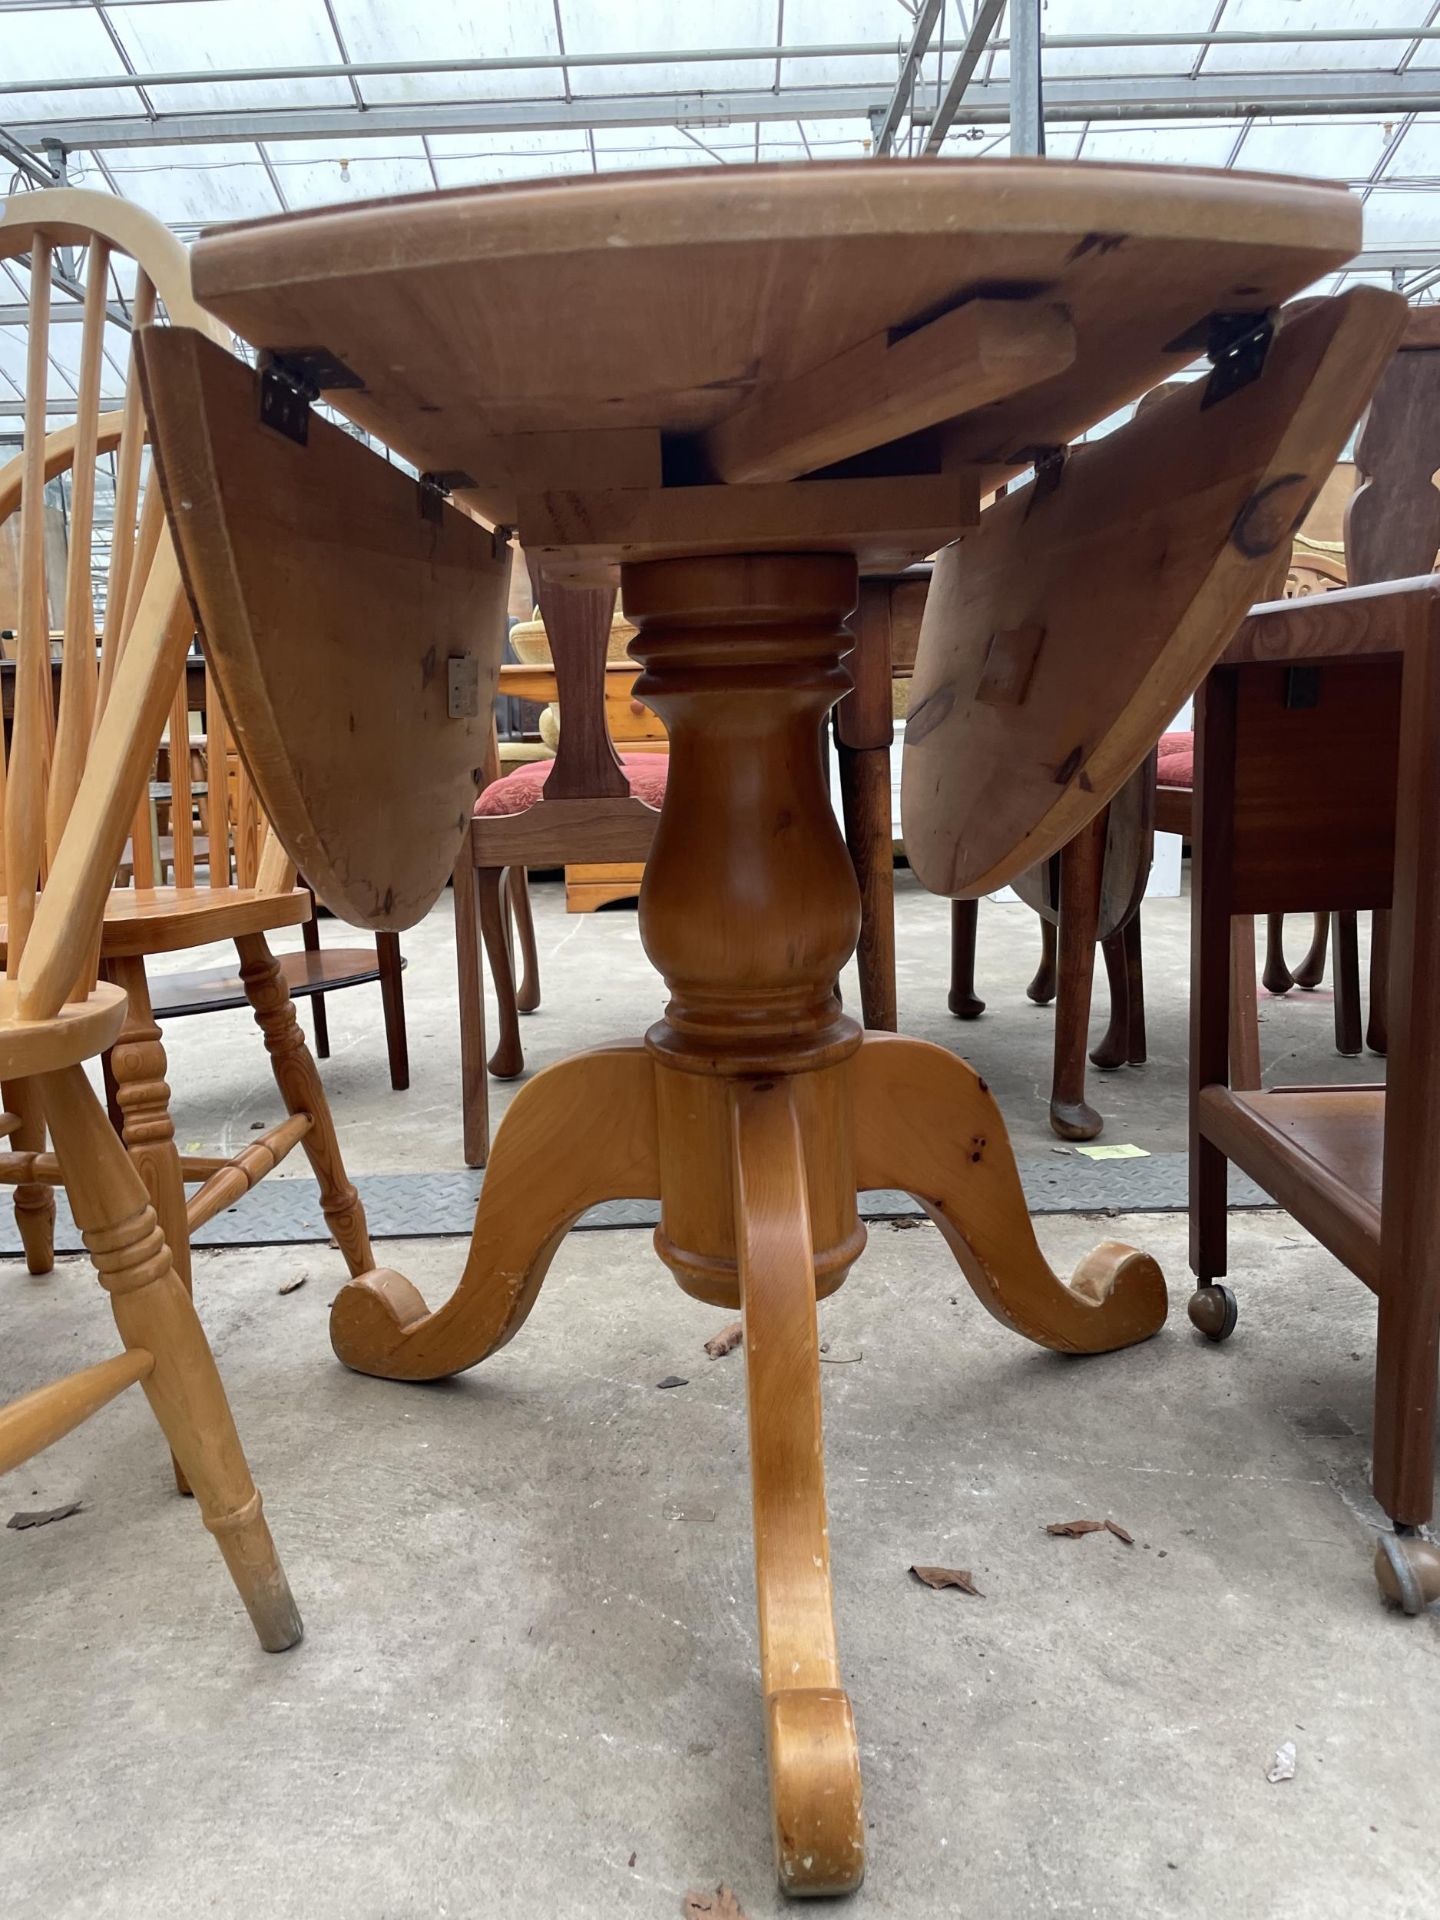 A PINE 42" DIAMETER DROP-LEAF DINING TABLE ON TRIPOD BASE AND A PAIR OF WINDSOR STYLE CHAIRS - Image 3 of 3